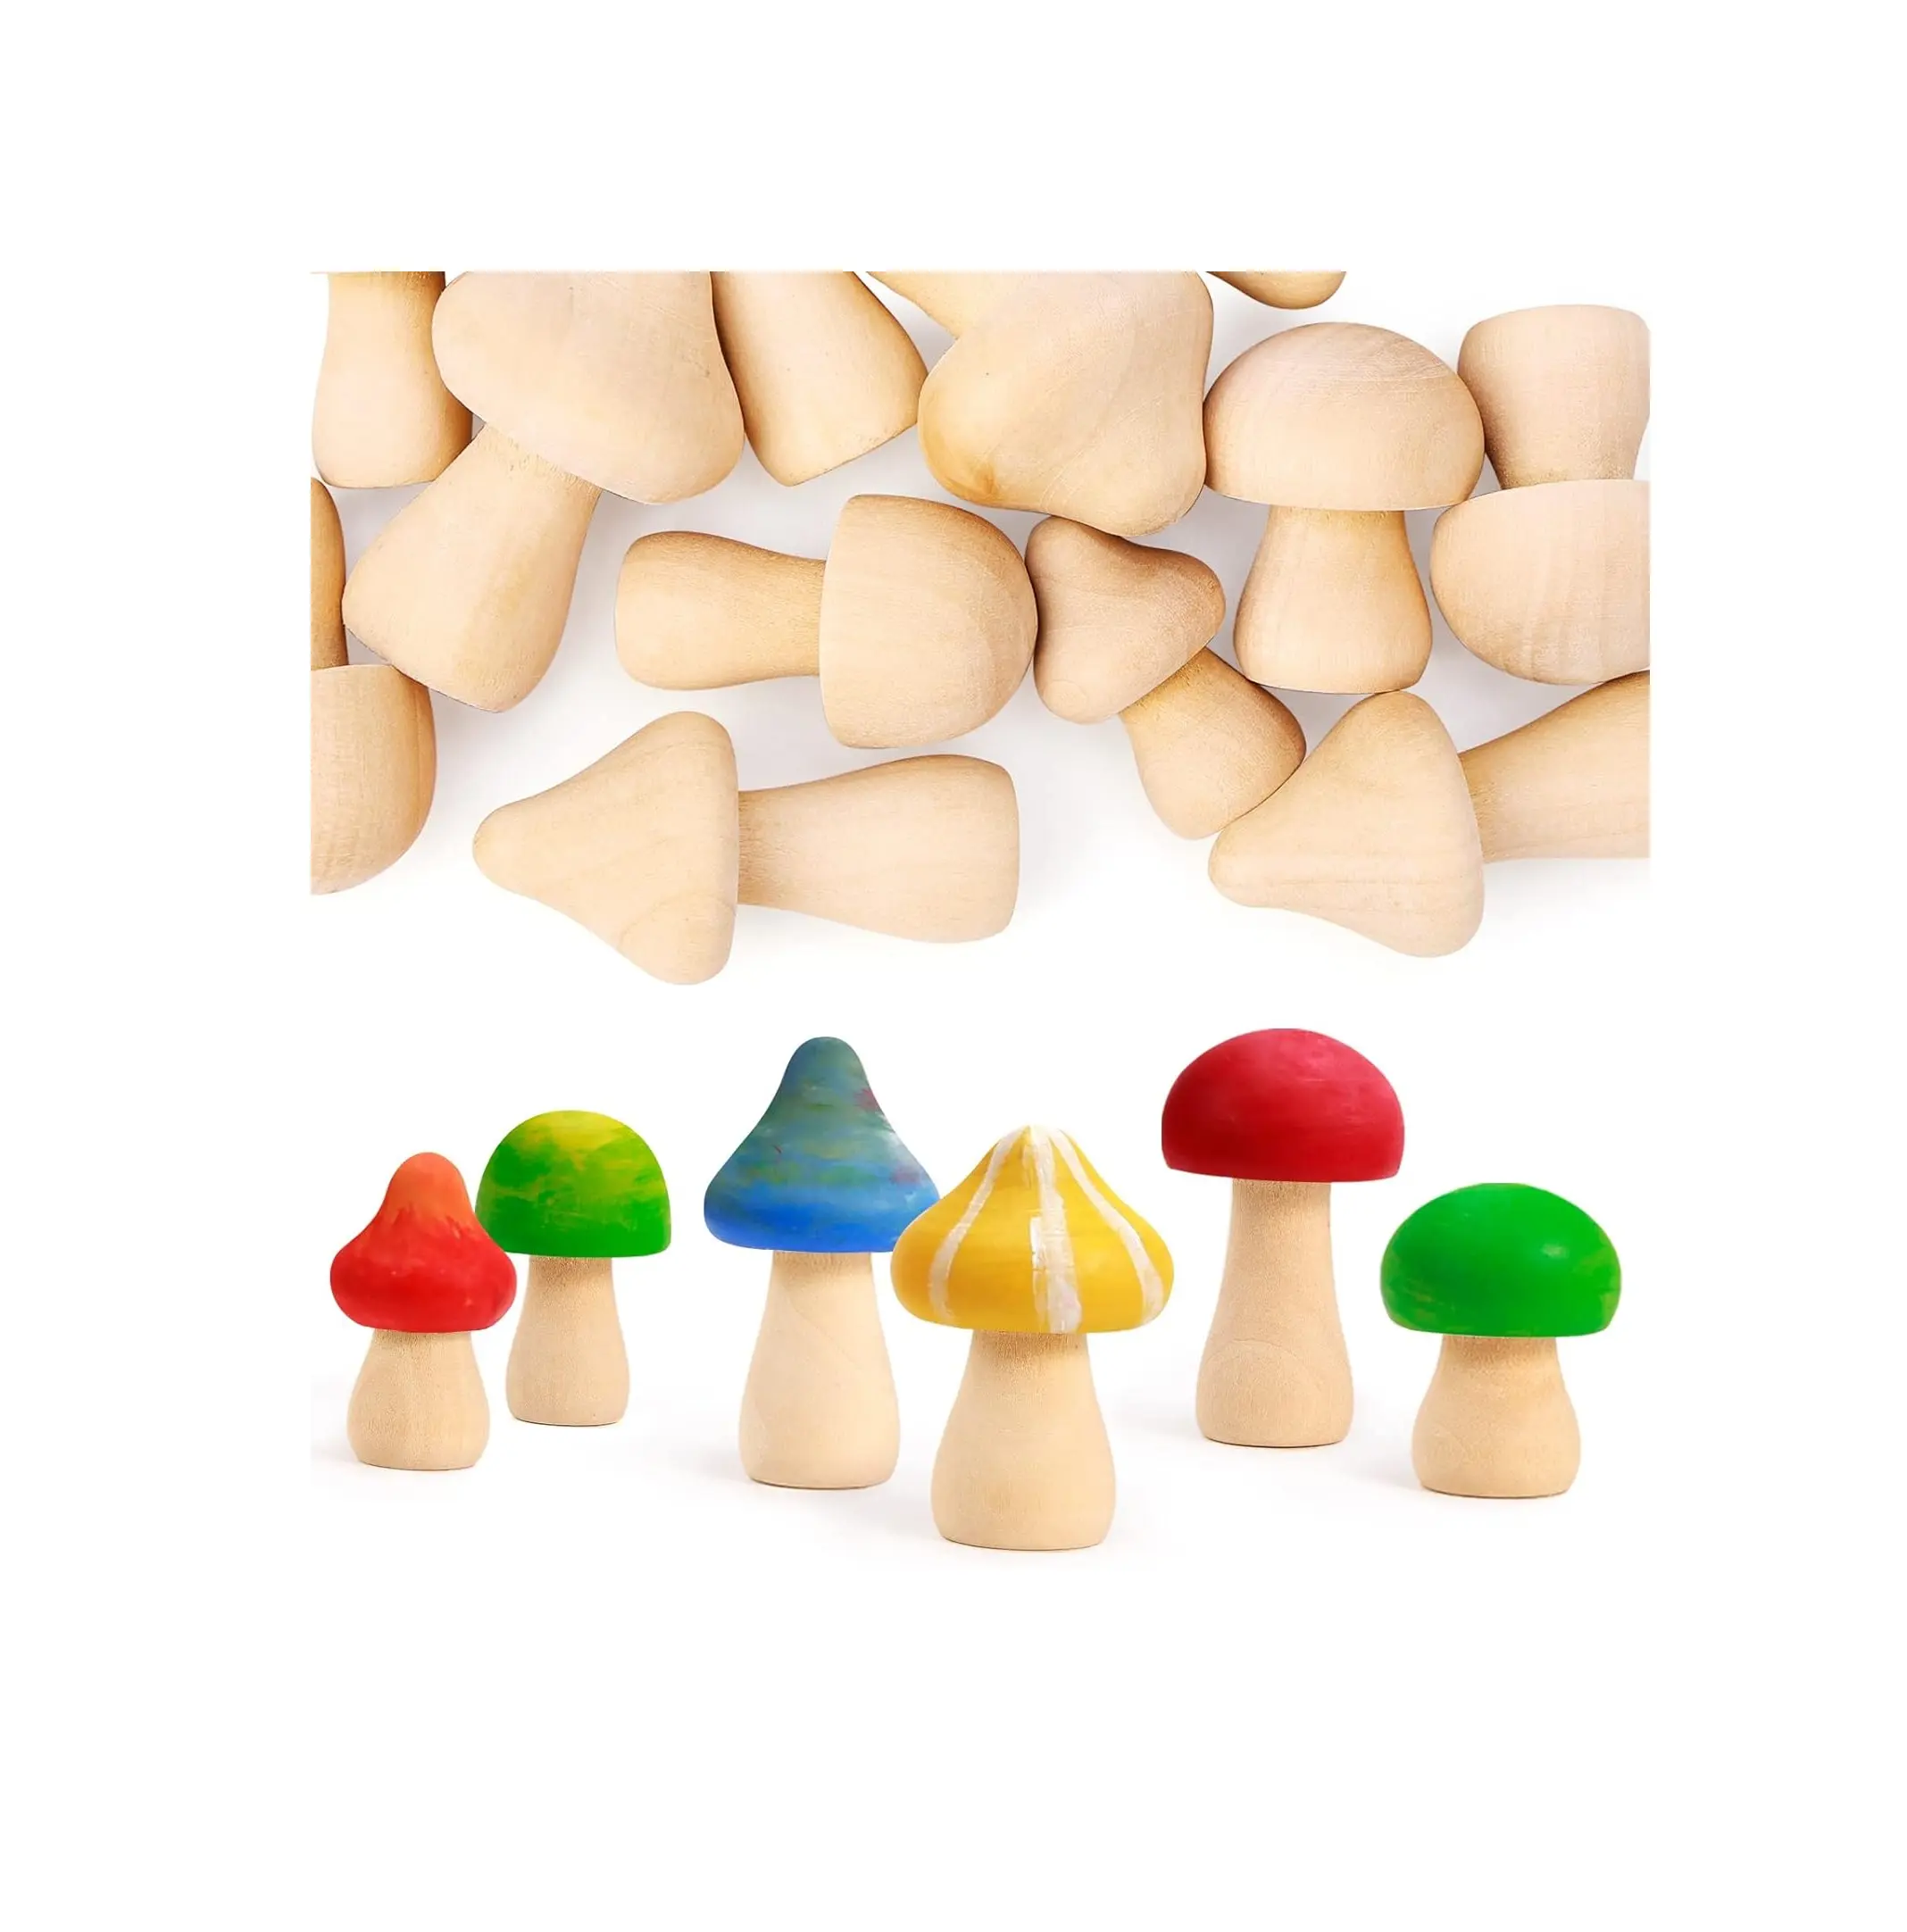 18 Pieces Unfinished Wooden Mushroom 6 Different Sizes Unpainted Wood Mushrooms for Children's Arts & Crafts Projects Decoration